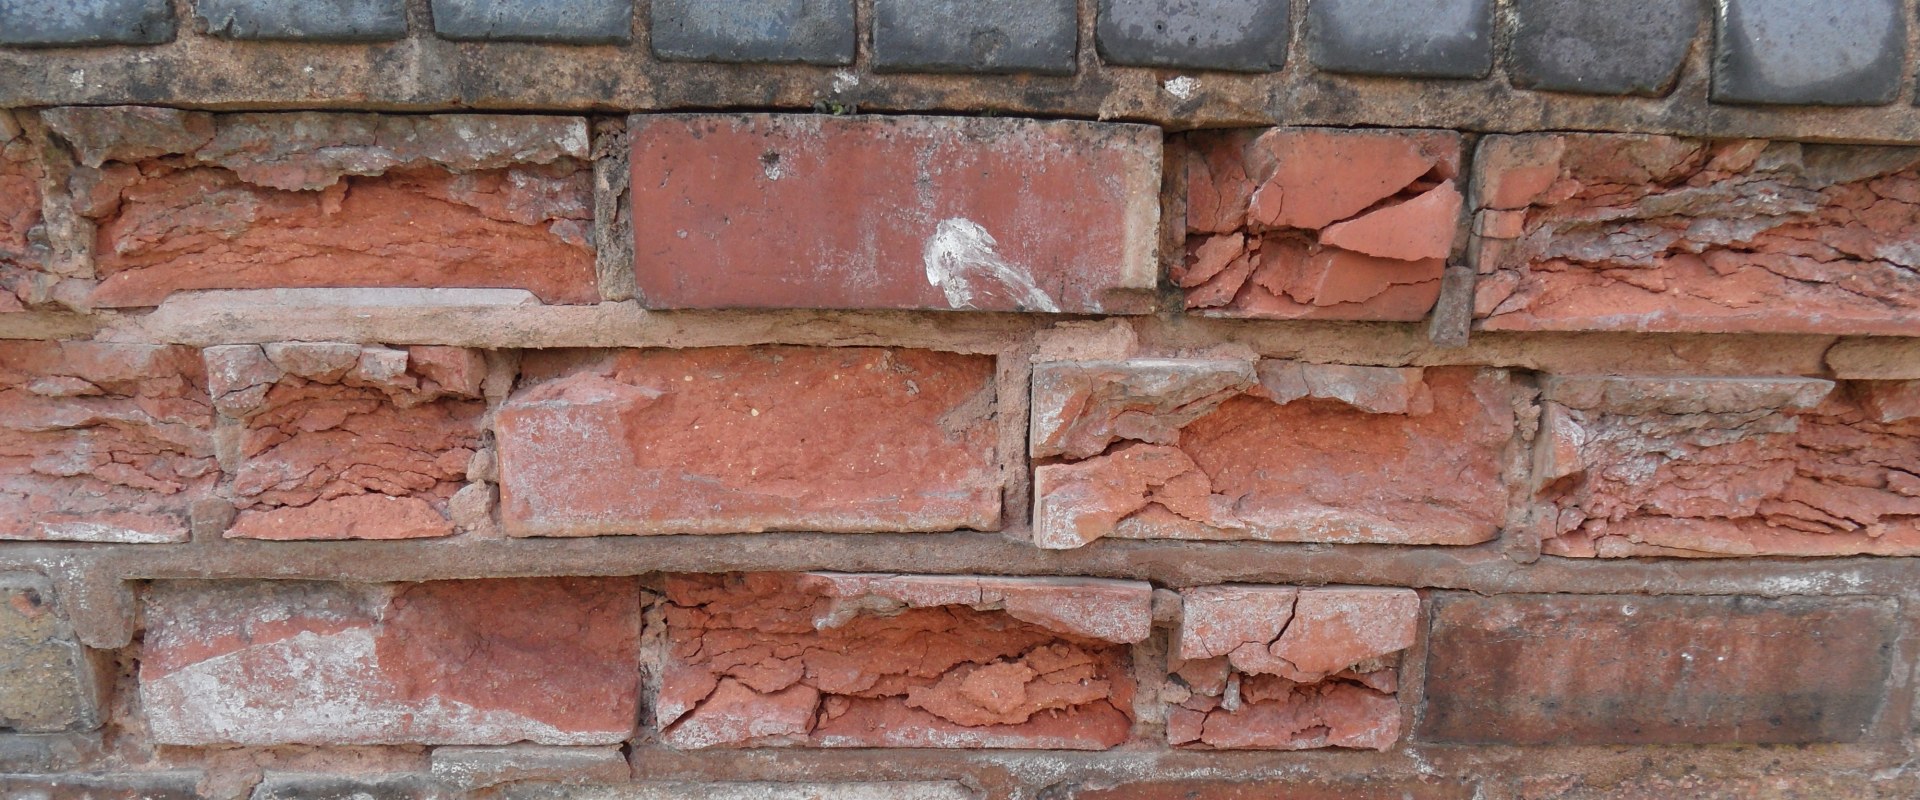 Is Brick Chipping a Serious Problem?